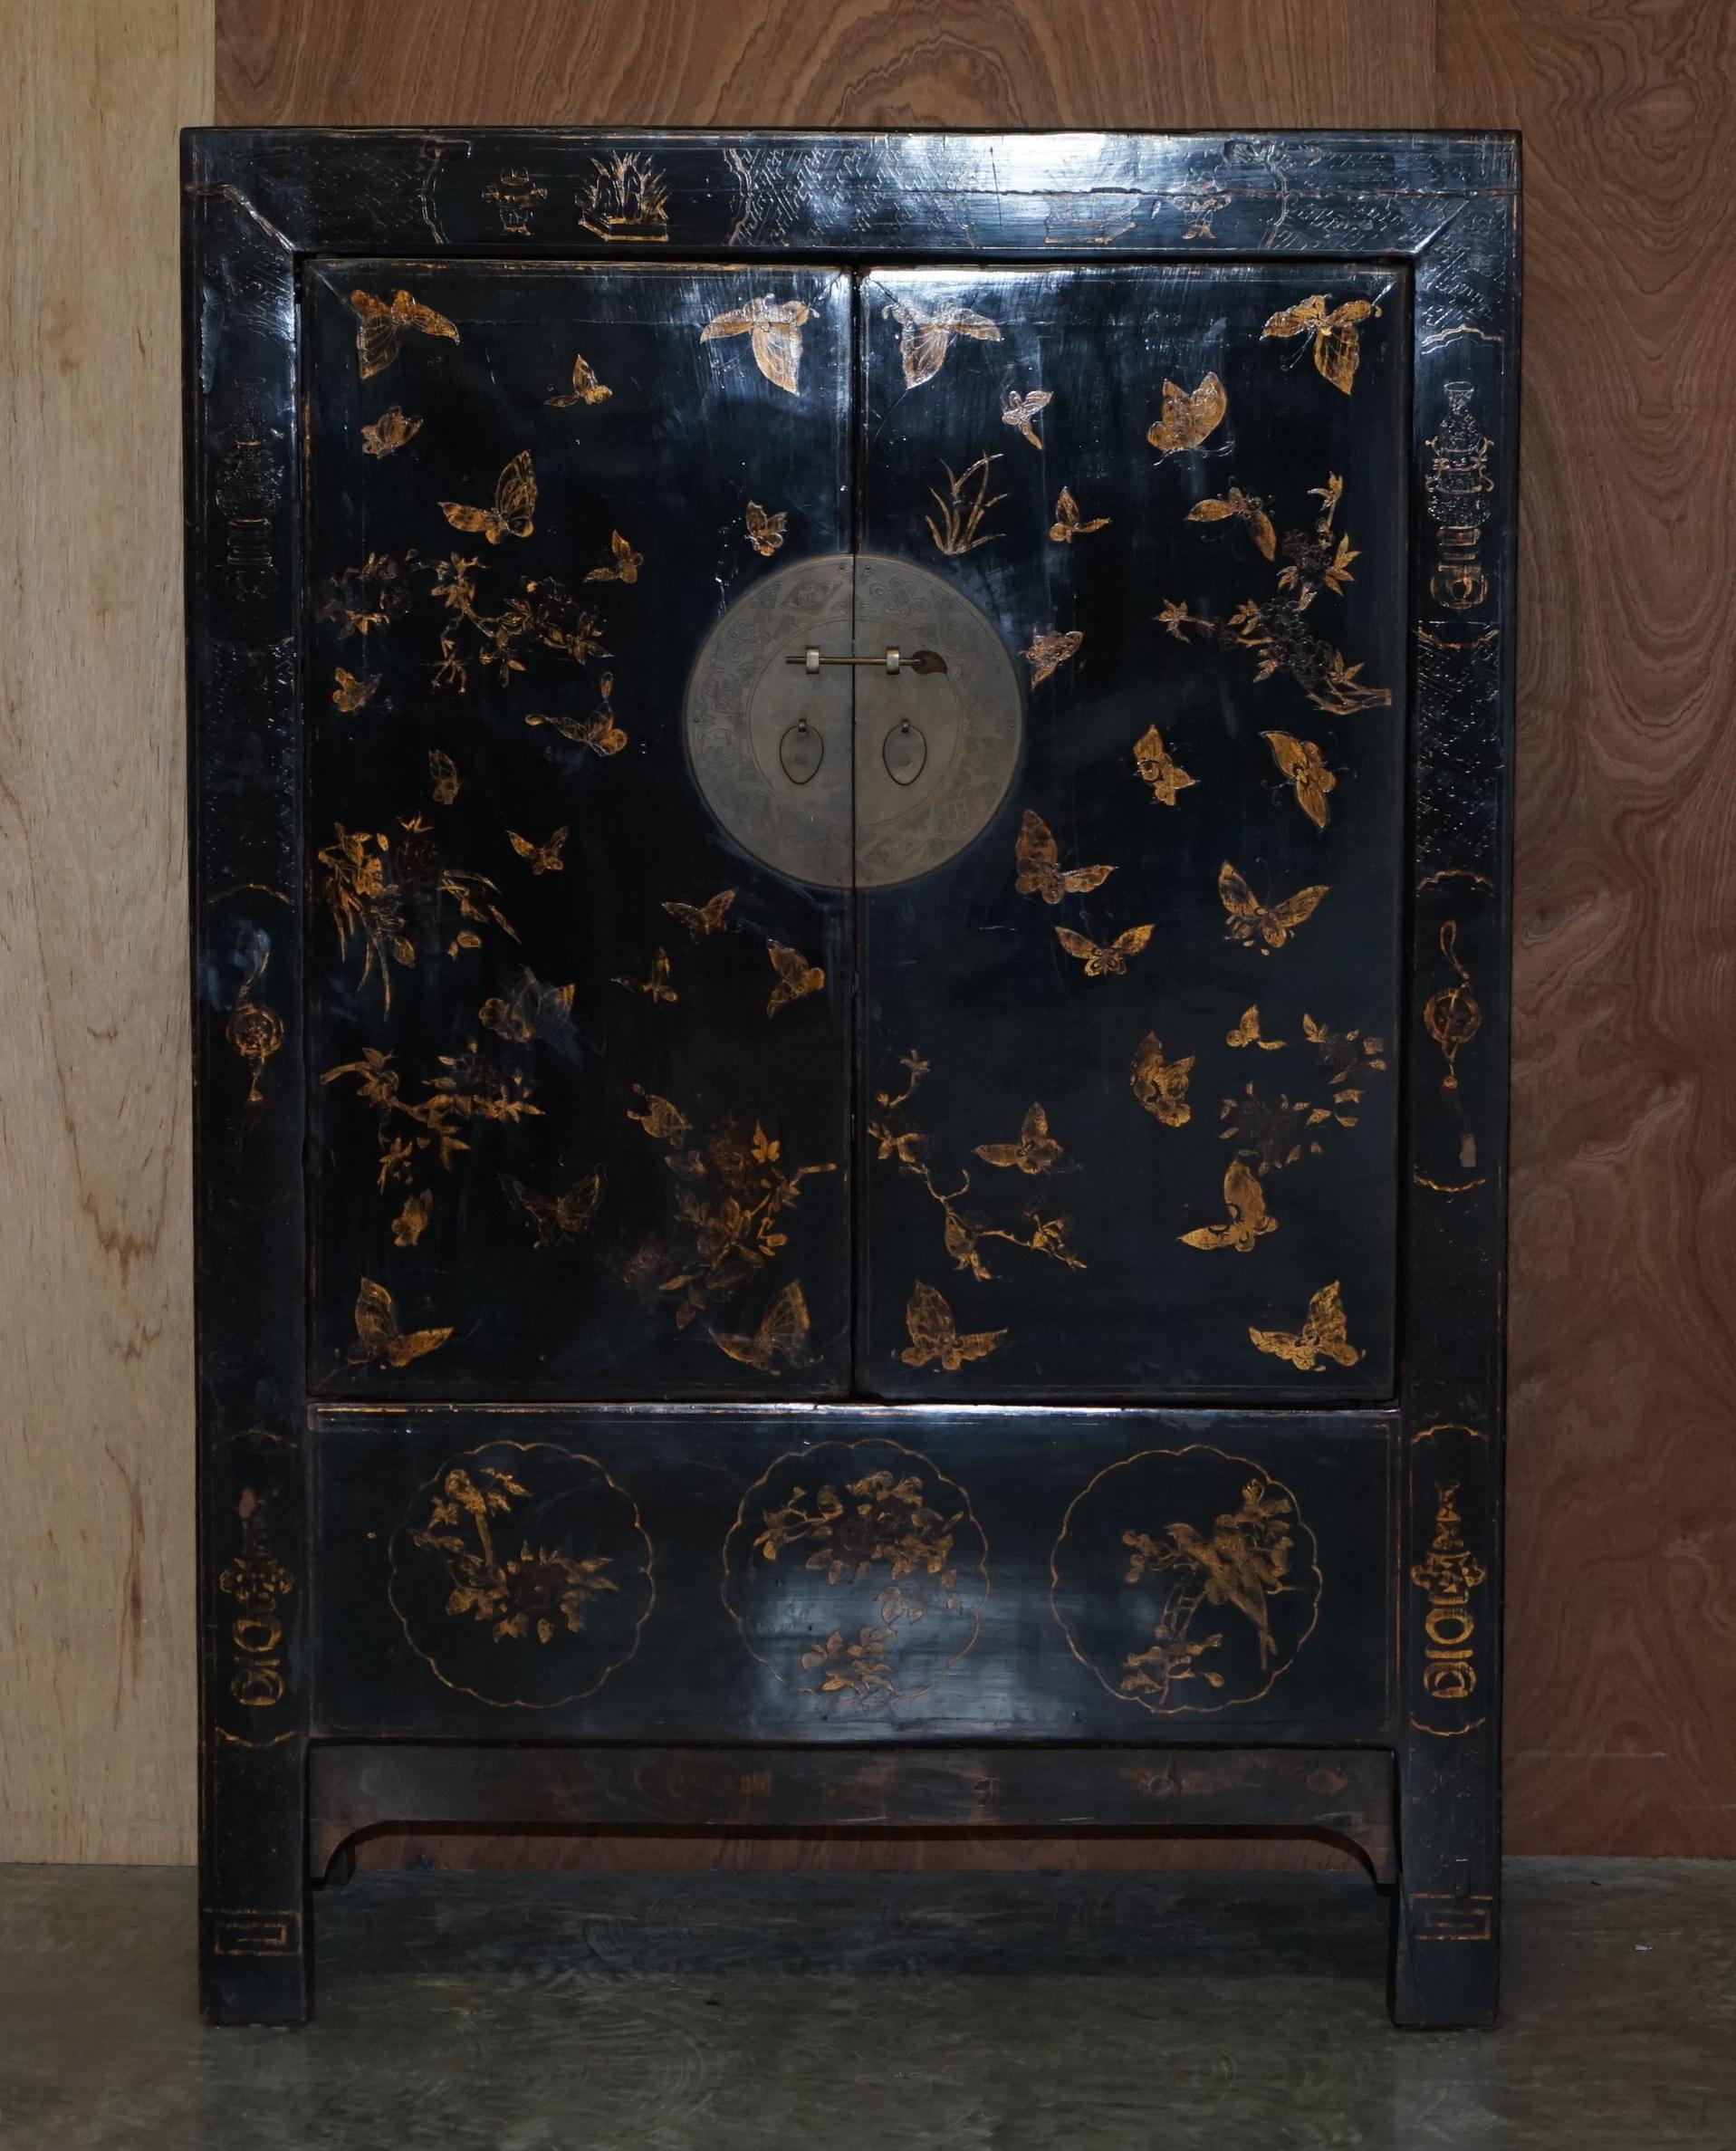 We are delighted to offer this lovely antique circa 1880 hand painted and lacquered Chinese Wedding cupboard for folded linens etc

A very good looking and well made piece, these are now highly collectable as art furniture. This was has a nicely